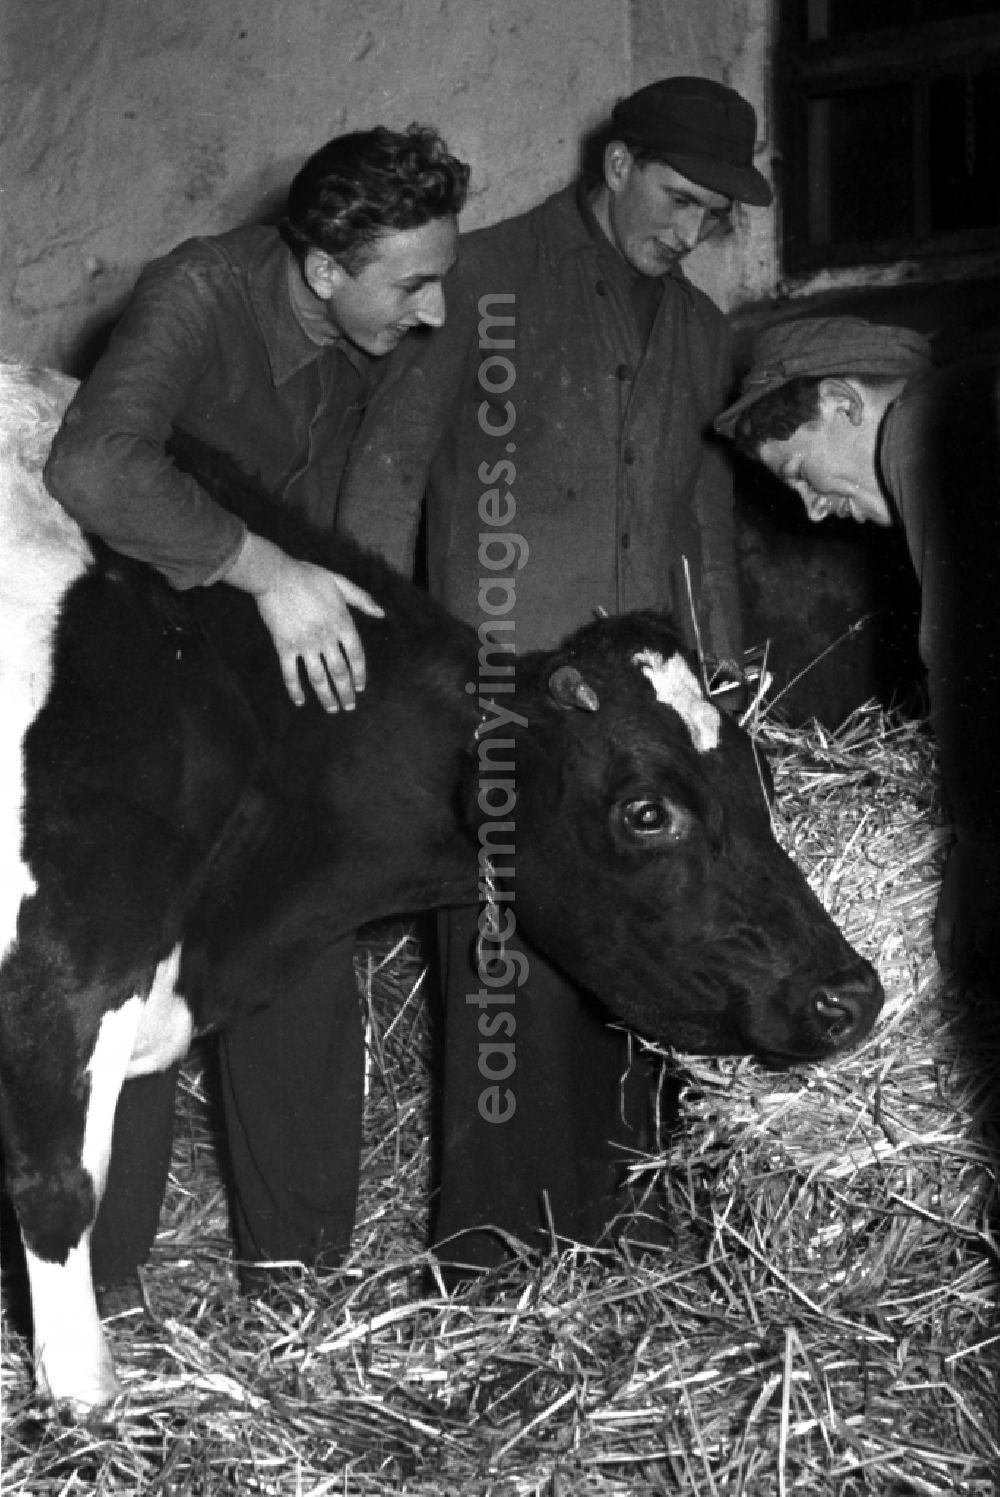 Reichstädt: Milk production work on a farm in Reichstaedt in the state Thuringia on the territory of the former GDR, German Democratic Republic